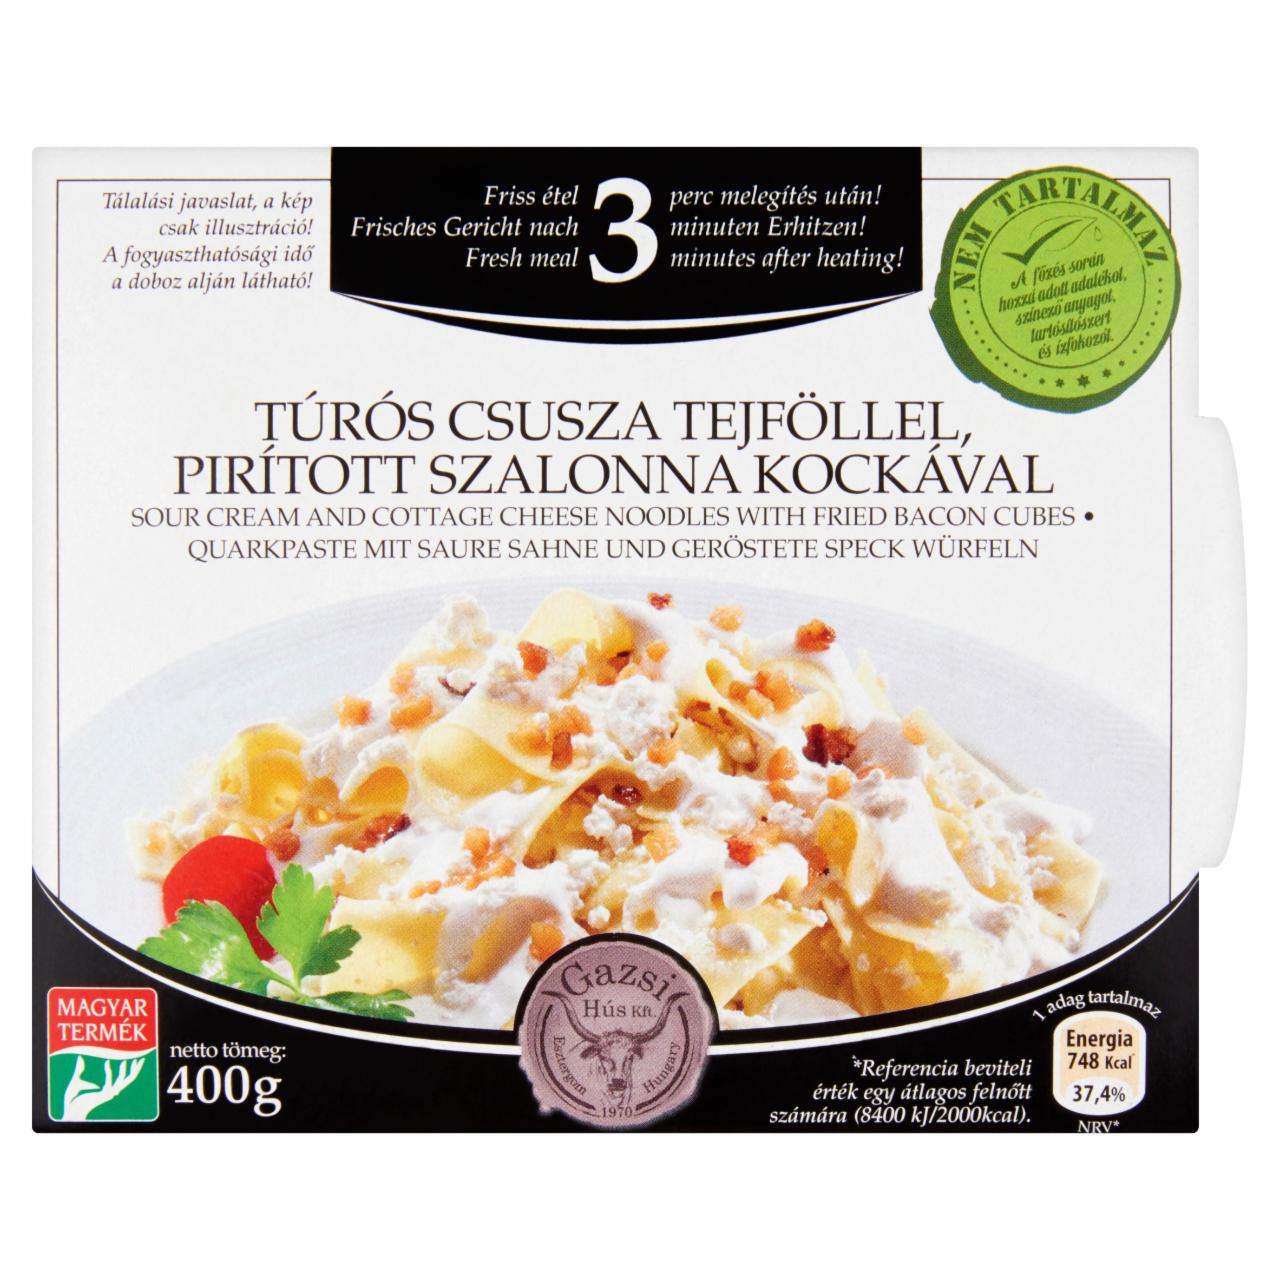 Photo - Gazsi Sour Cream and Cottage Cheese Noodles with Fried Bacon Cubes 400 g